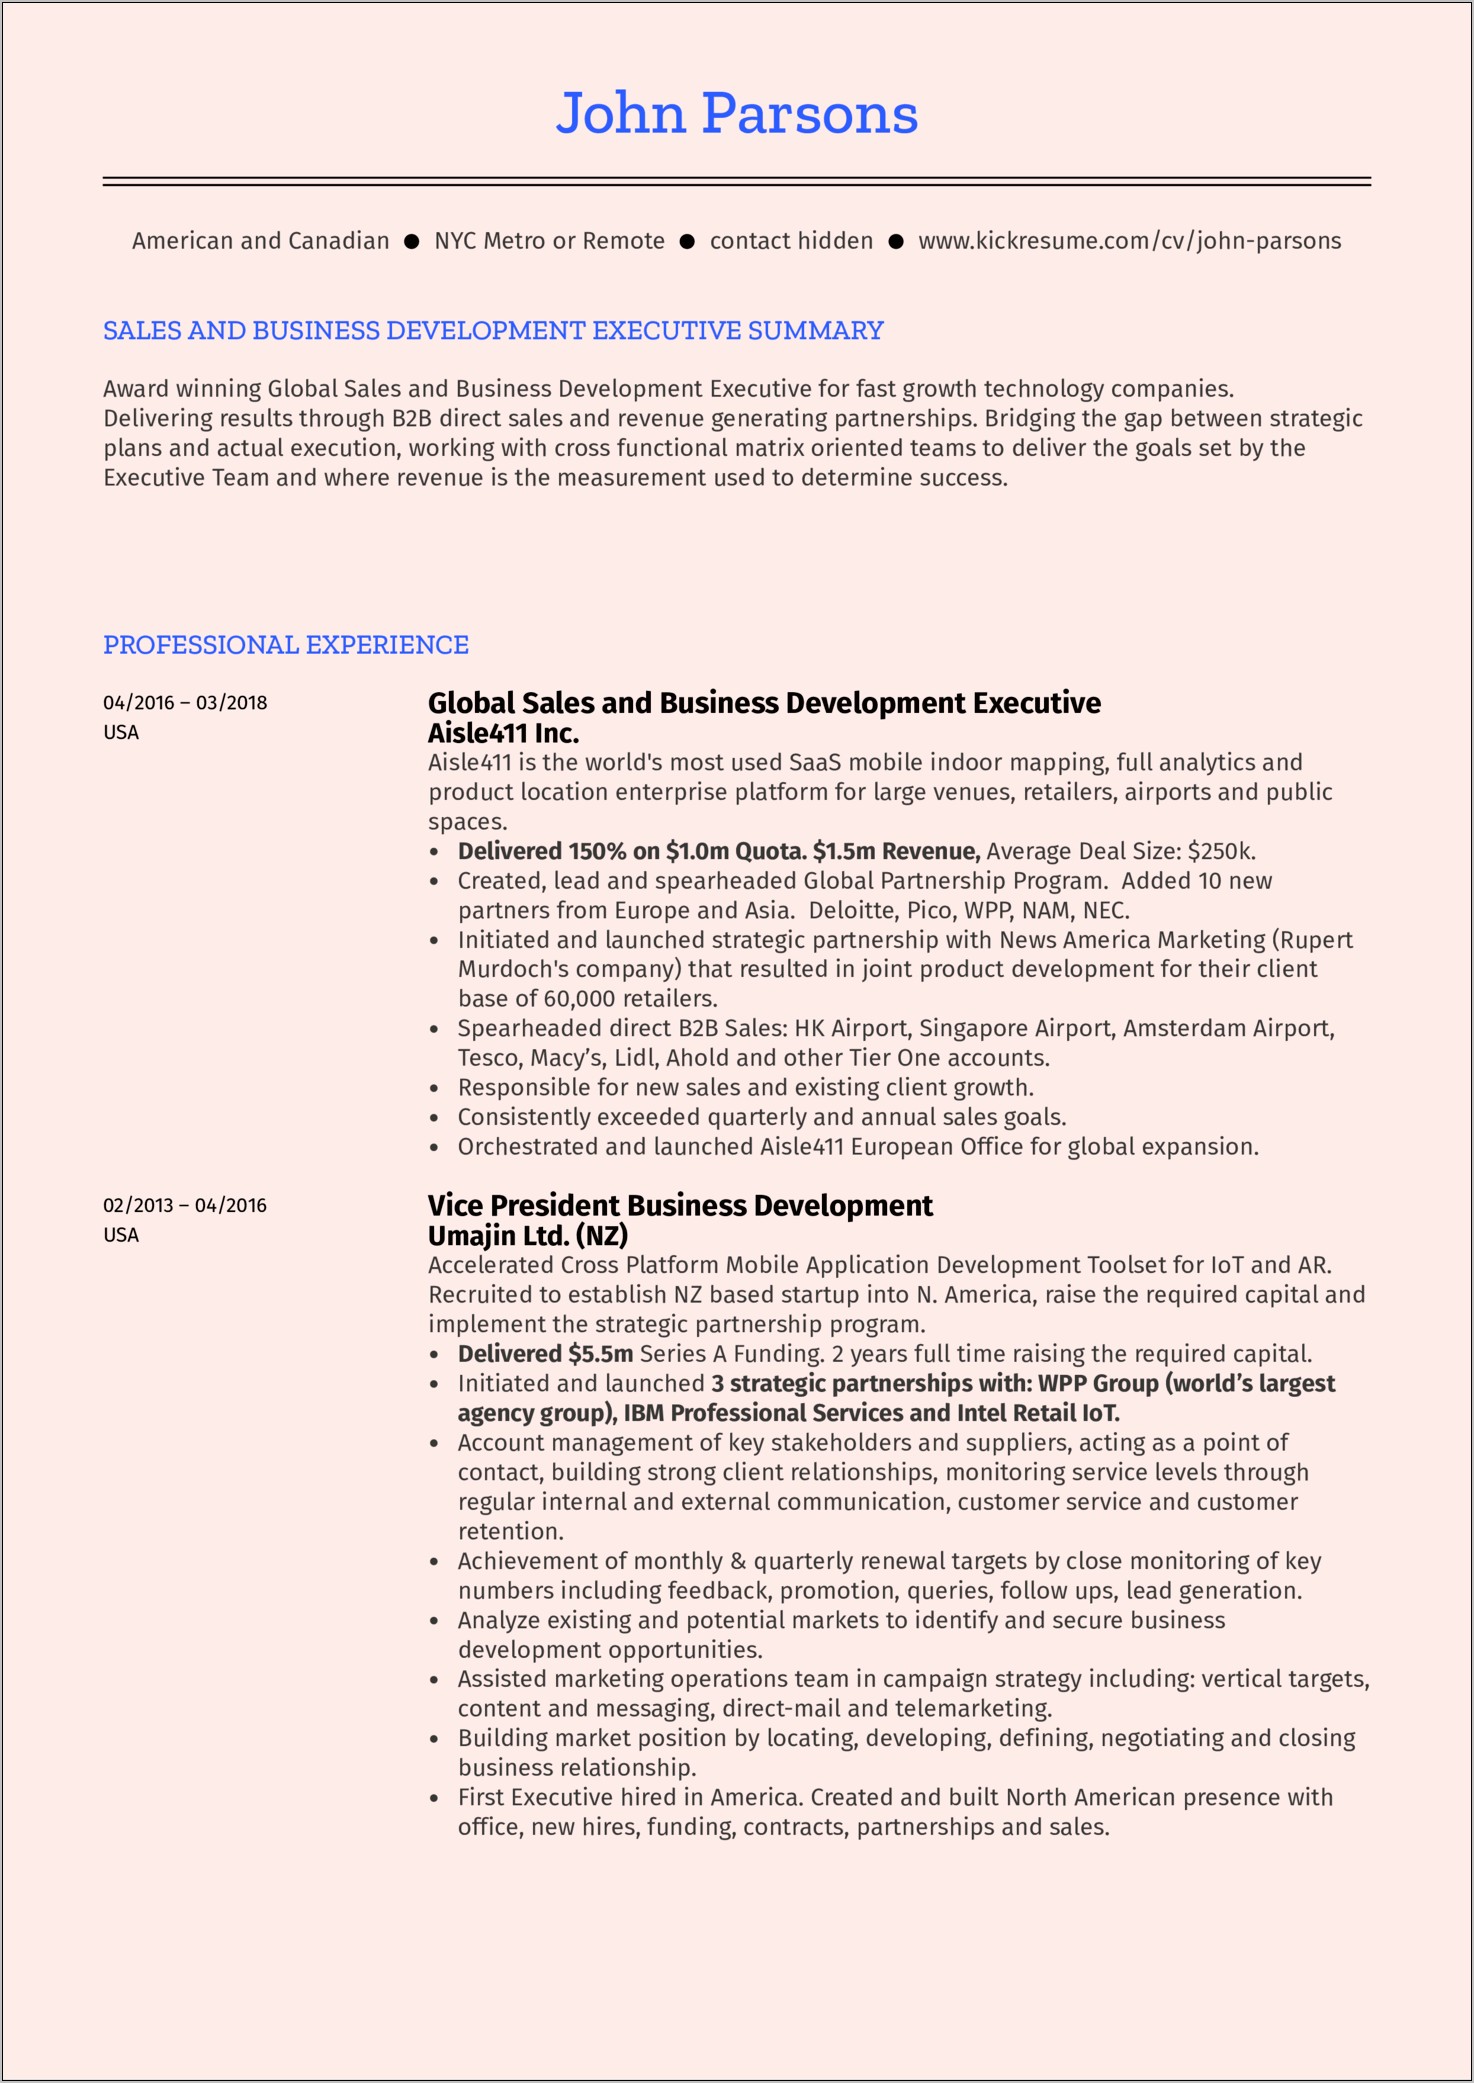 Direct Support Staff Sample Resume